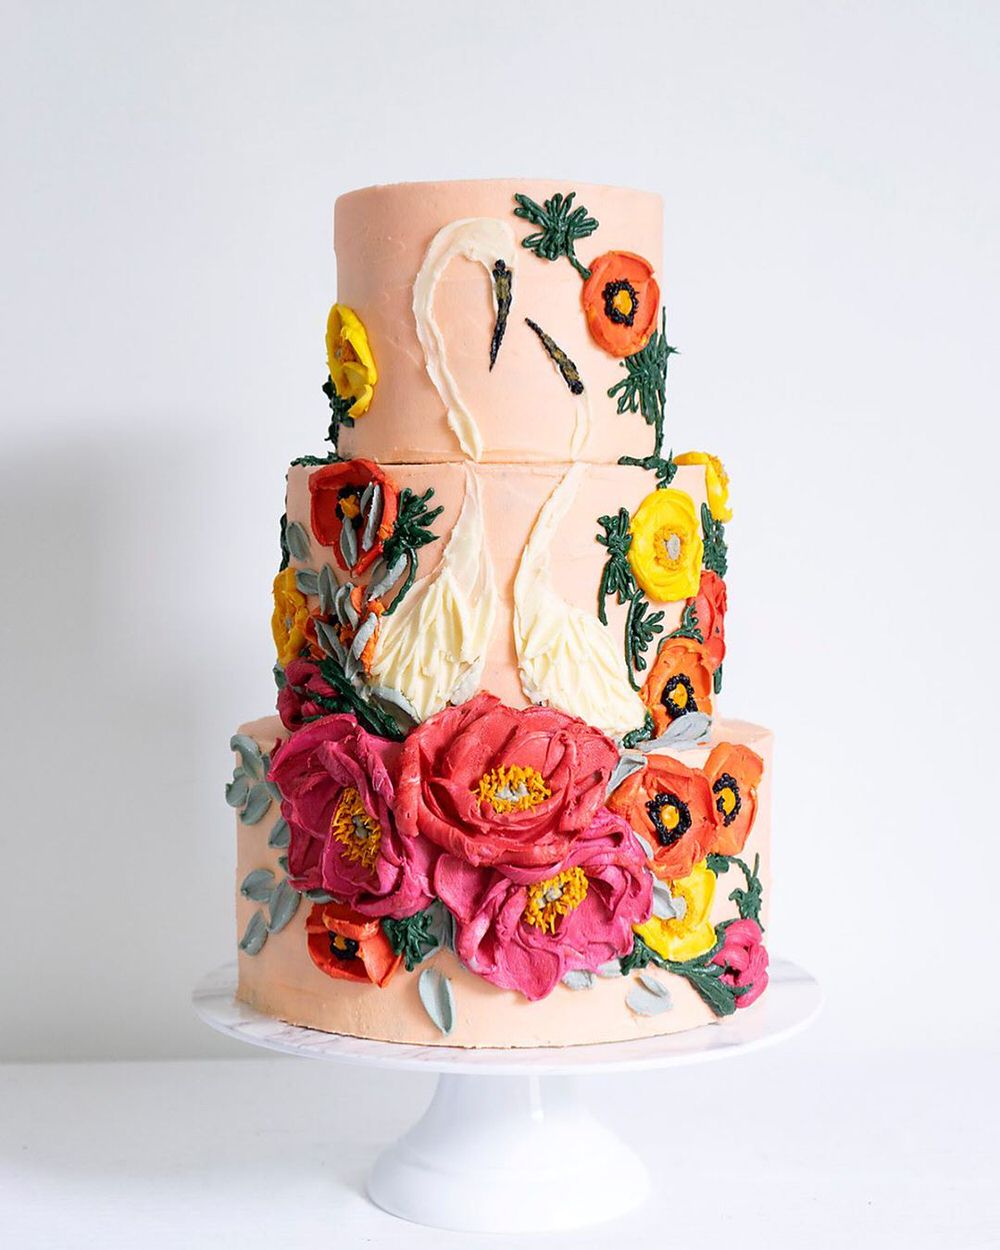 Romantically Gorgeous: Top 20 Wedding Anniversary Cakes - EverAfterGuide